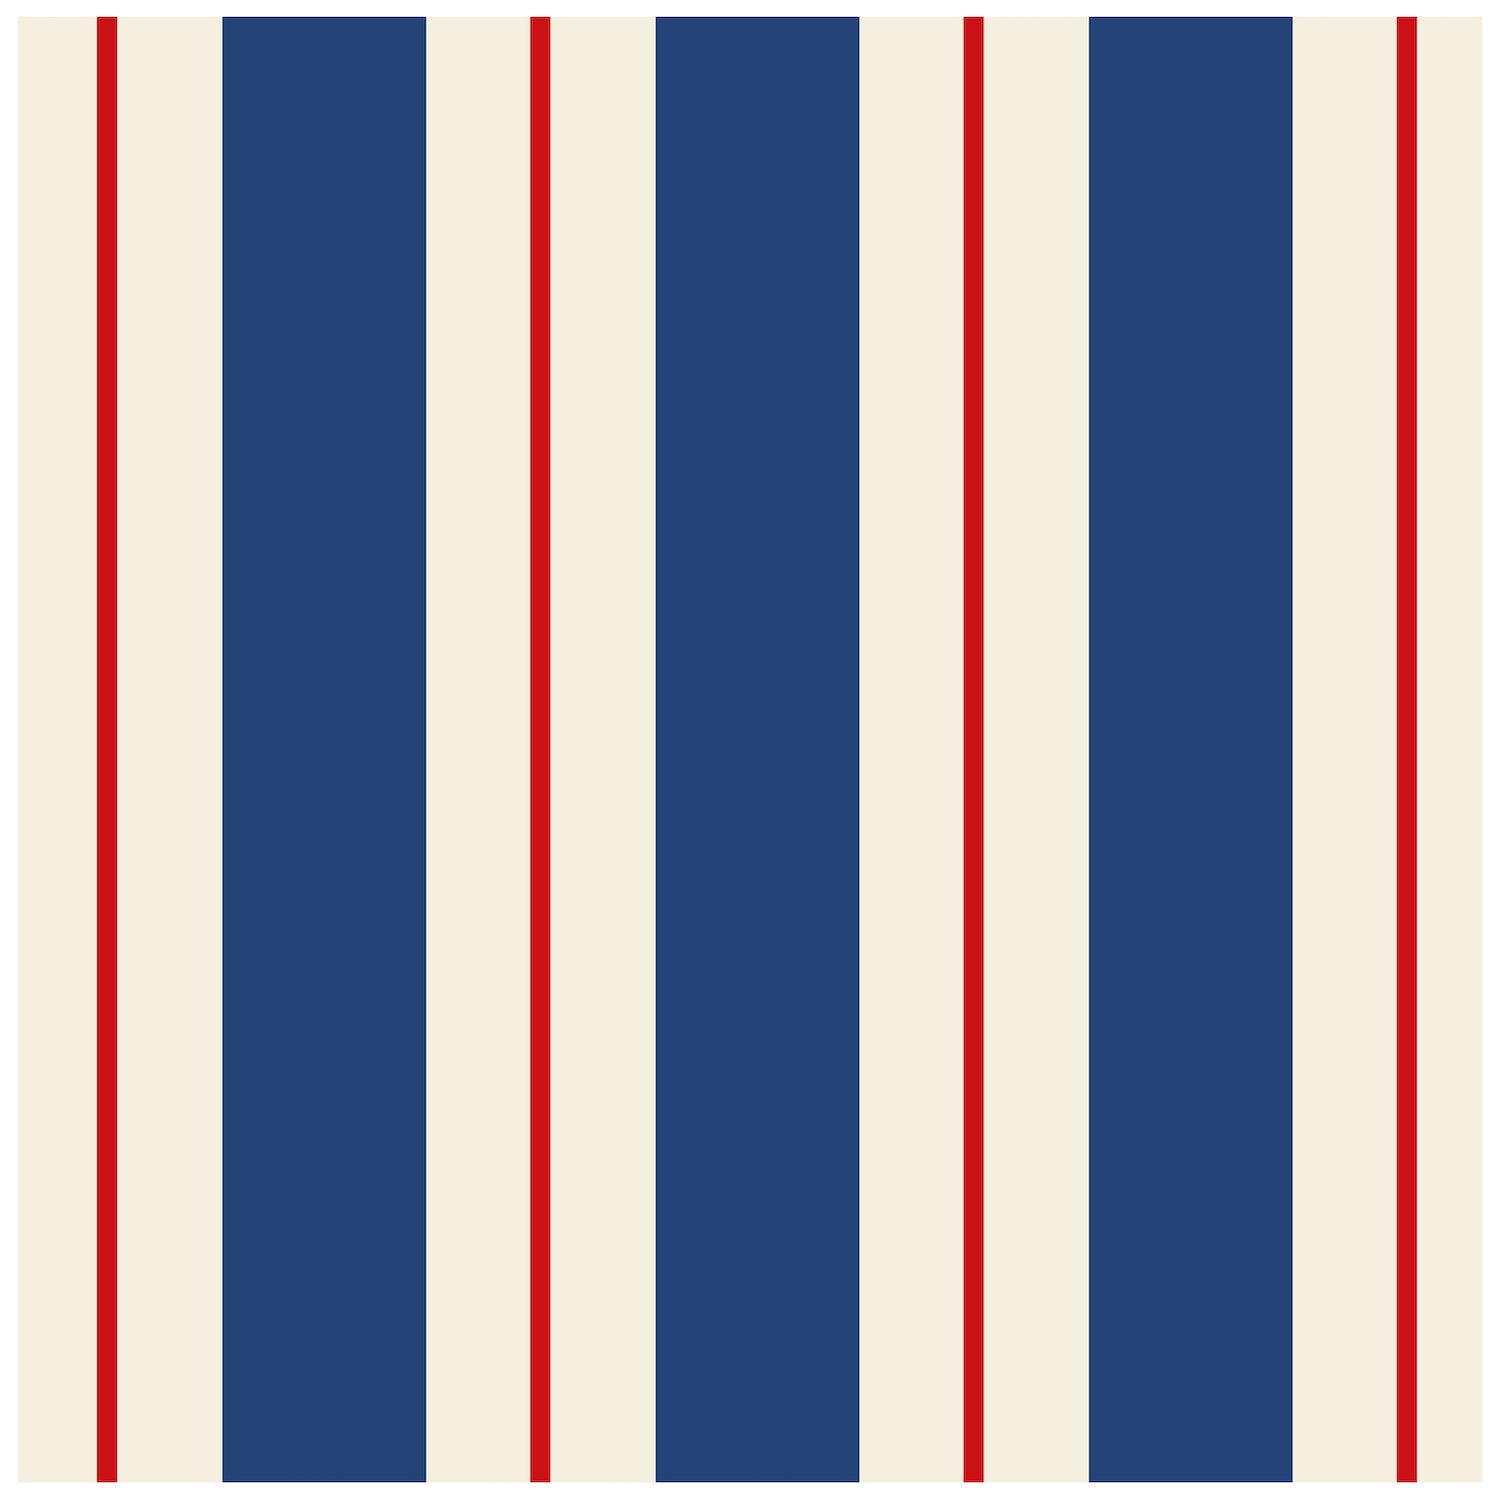 A blue and white striped wallpaper with red and white stripes, perfect for a party table setting could be replaced with &quot;Navy &amp; Red Awning Stripe Napkins by Hester &amp; Cook, perfect for a party table setting.